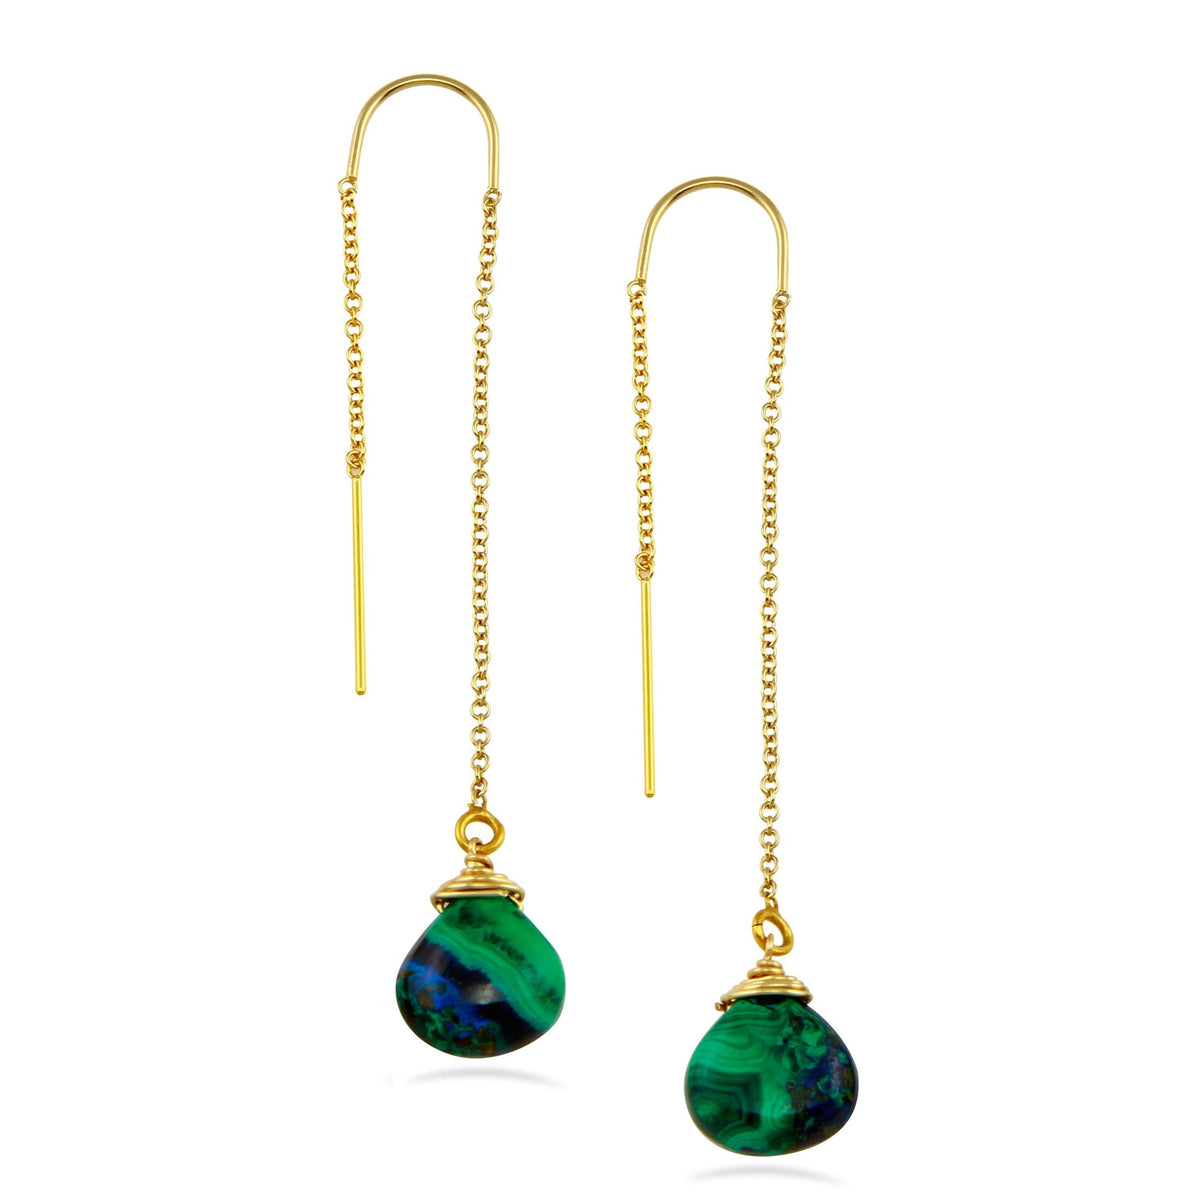 Azurite and malachite drop 14K yellow gold filled threader earrings | Little Rock Collection earrings Amanda K Lockrow